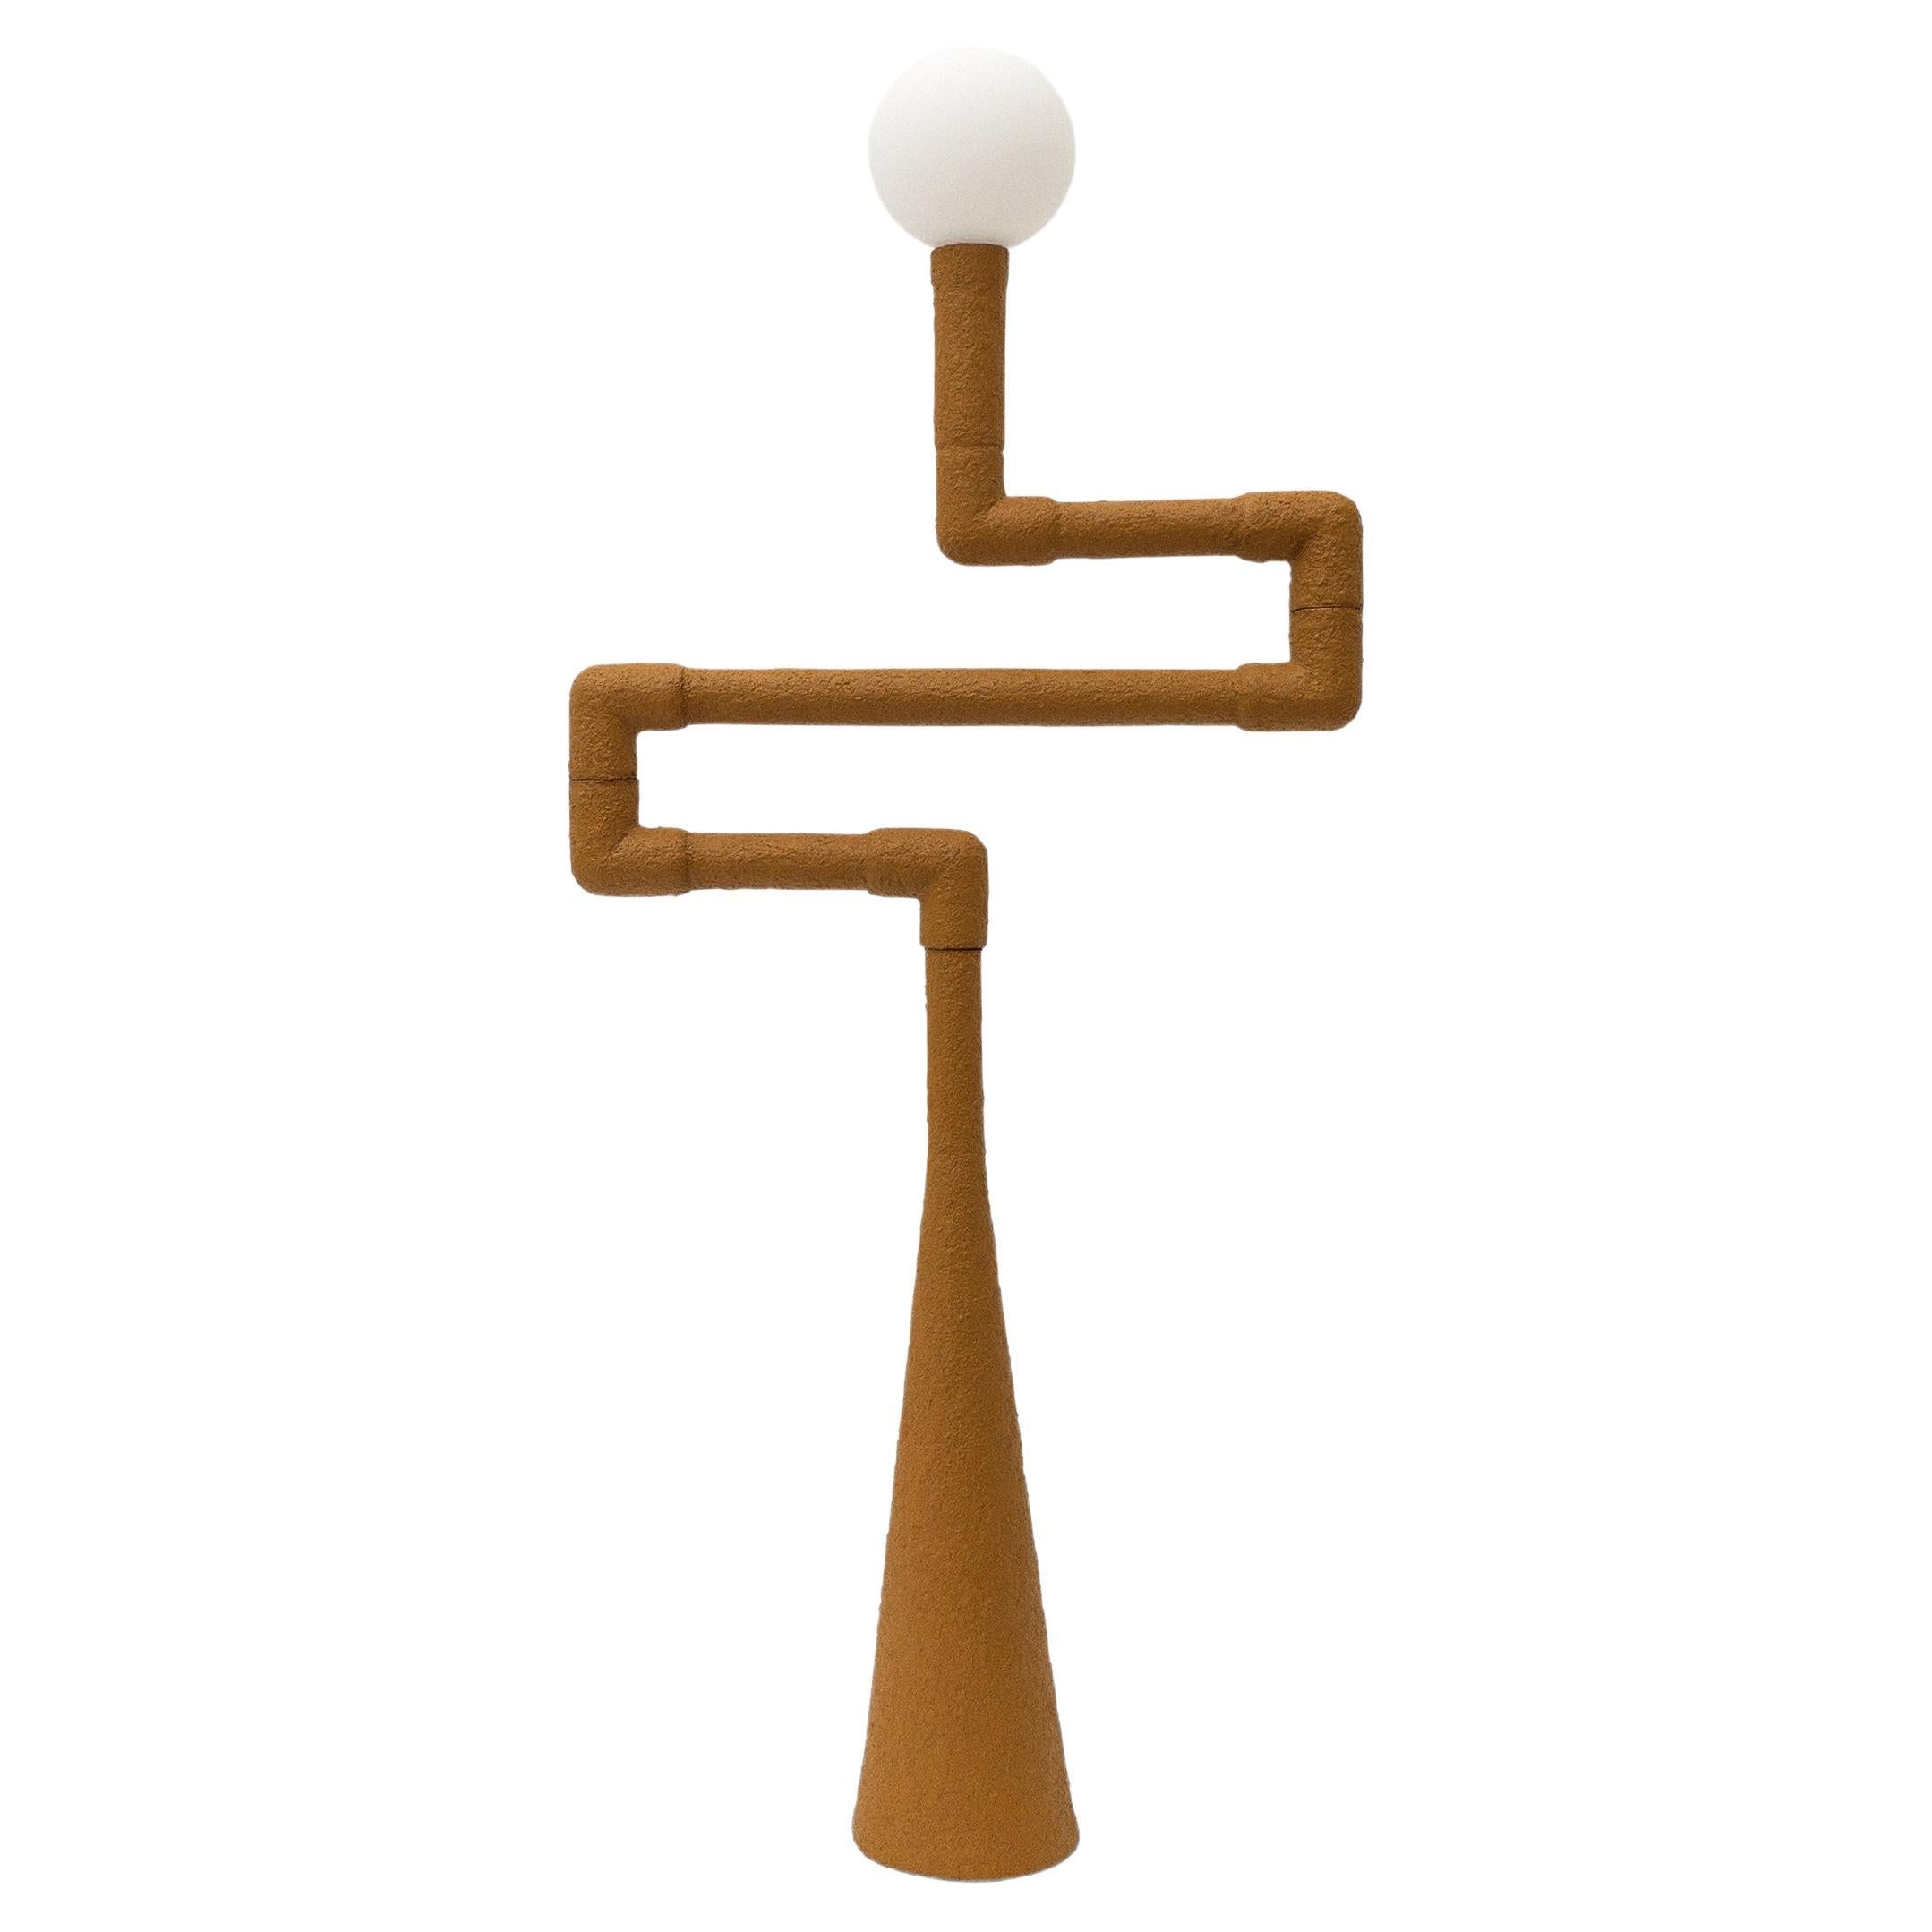 Contemporary Dimmable Table or Floor Lamp - "Labyrinth" by Nicola Cecutti For Sale